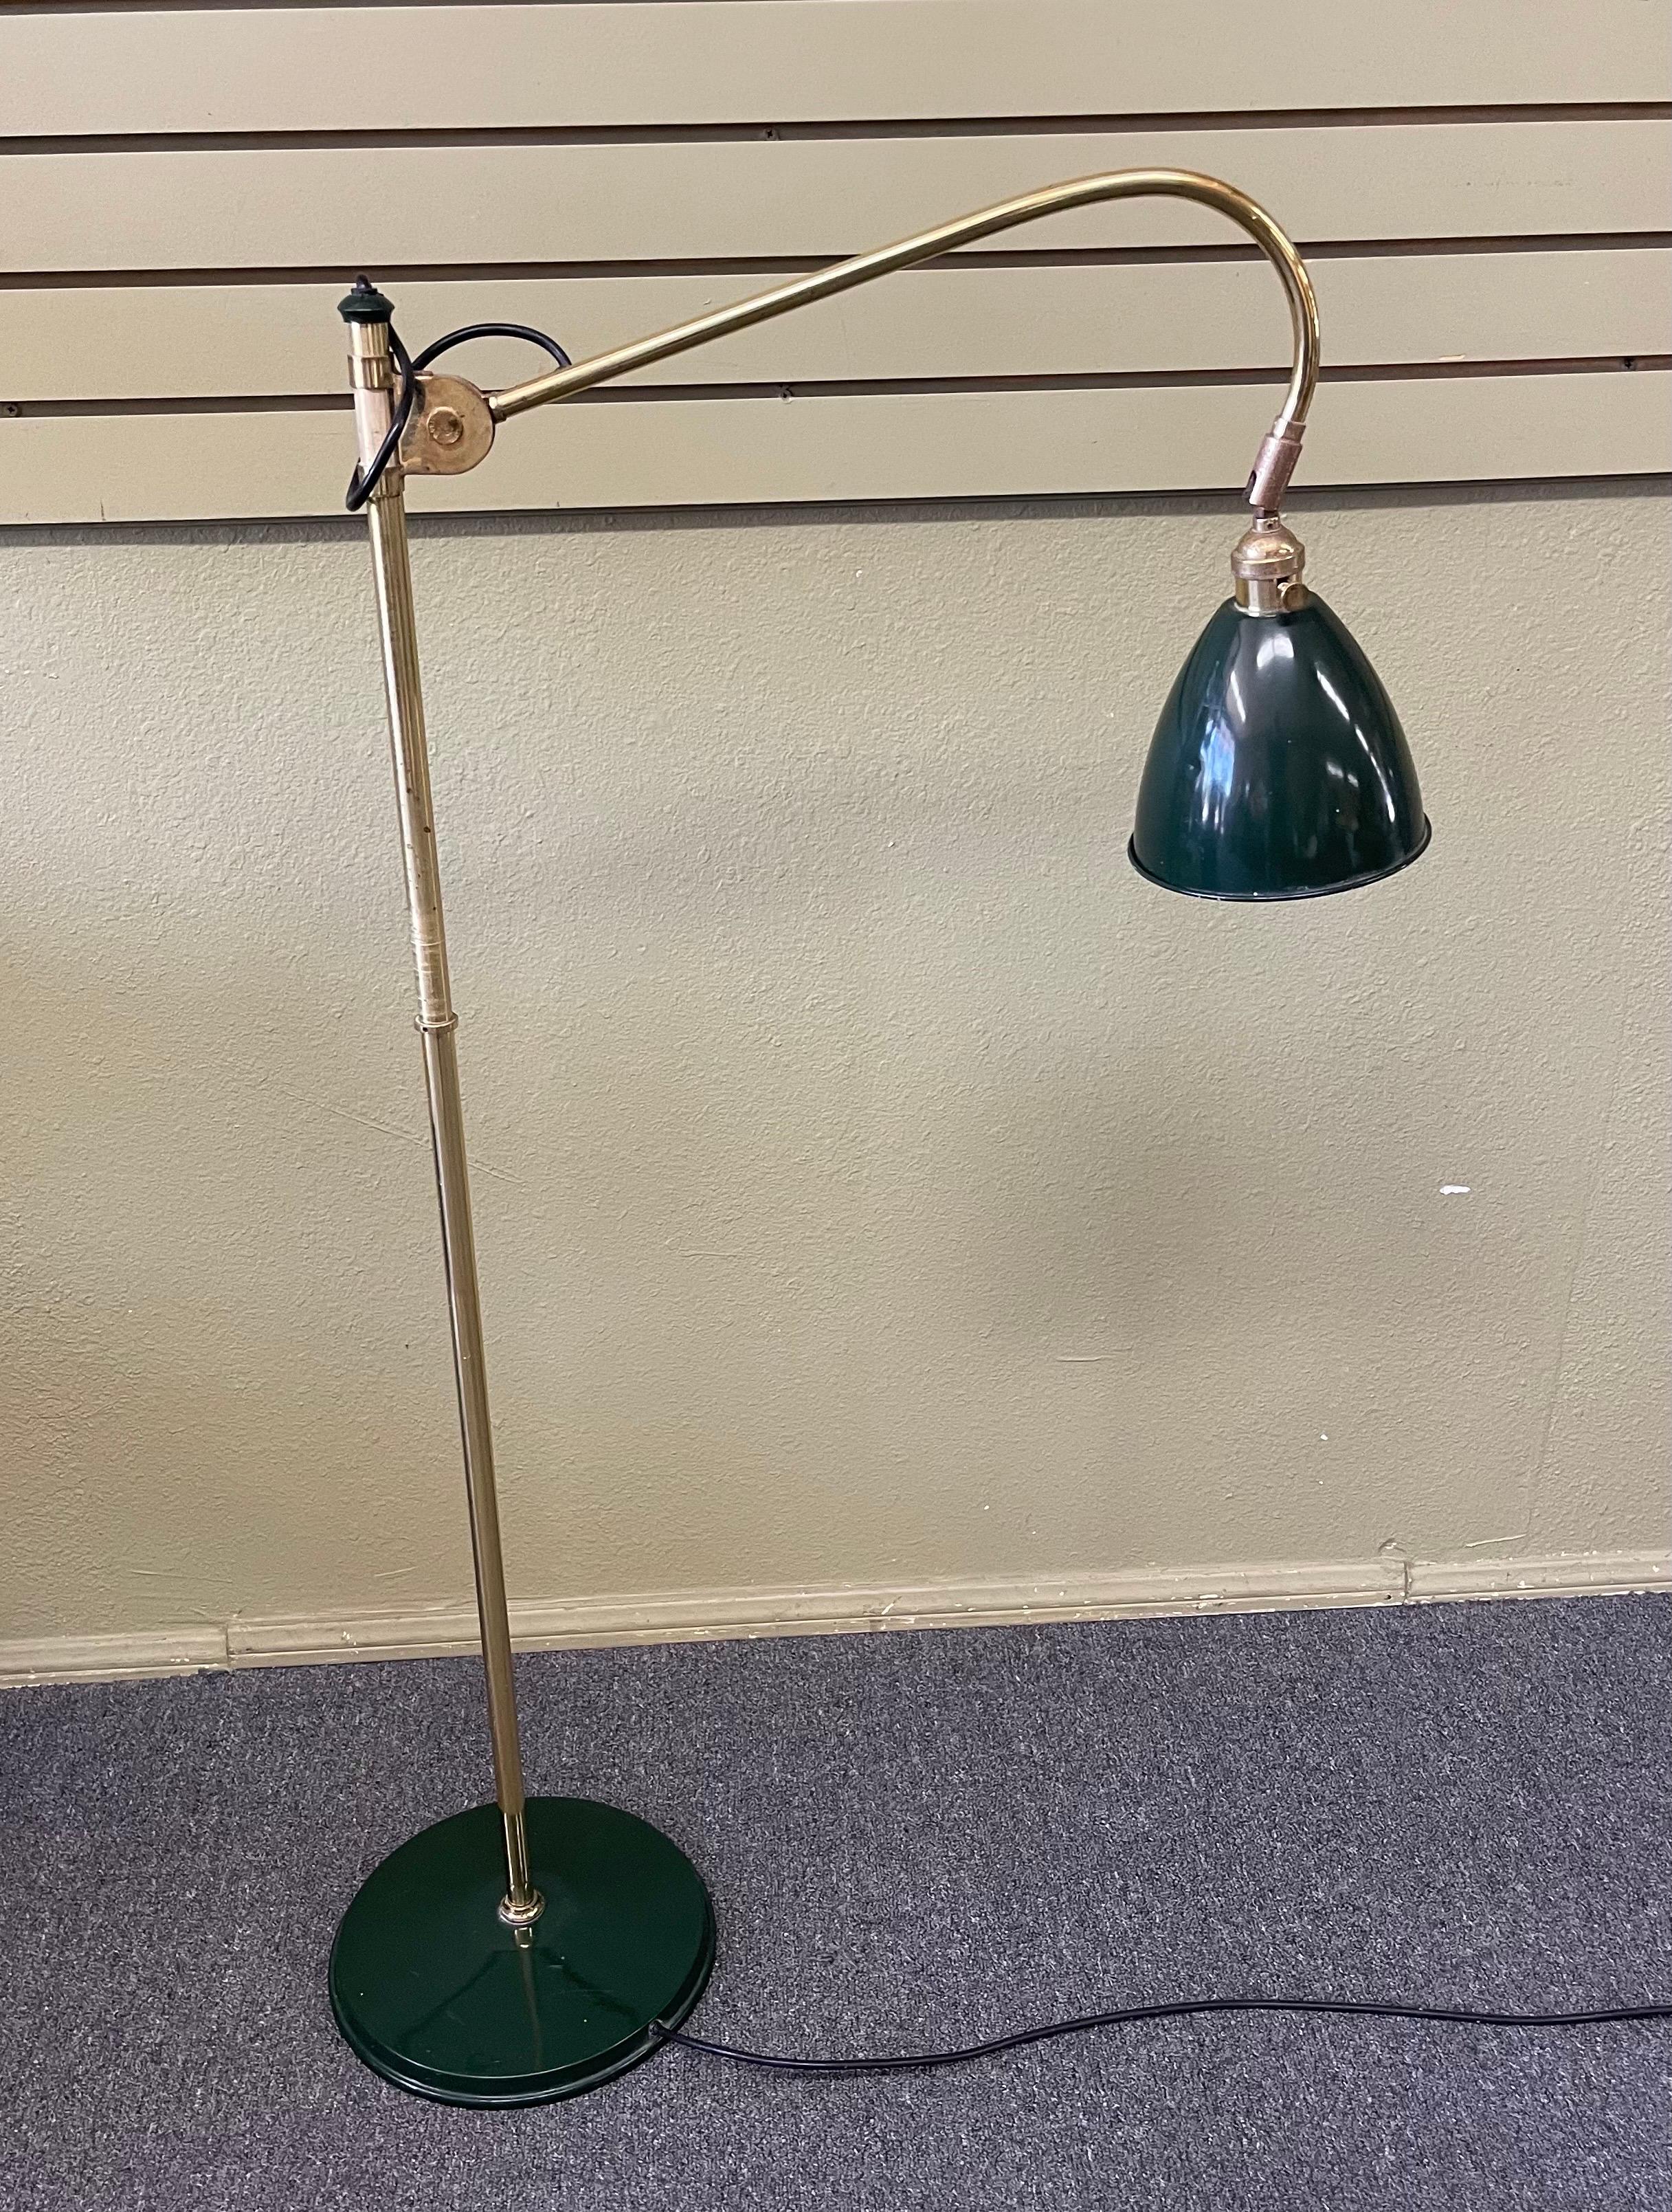 A very cool industrial architectural floor lamp by Louis Baldinger, circa 1980s. The piece is in good vintage condition and made of green painted sheet metal with brass accents and bars. The lamp is fully articulated at lamp hood and center of stem